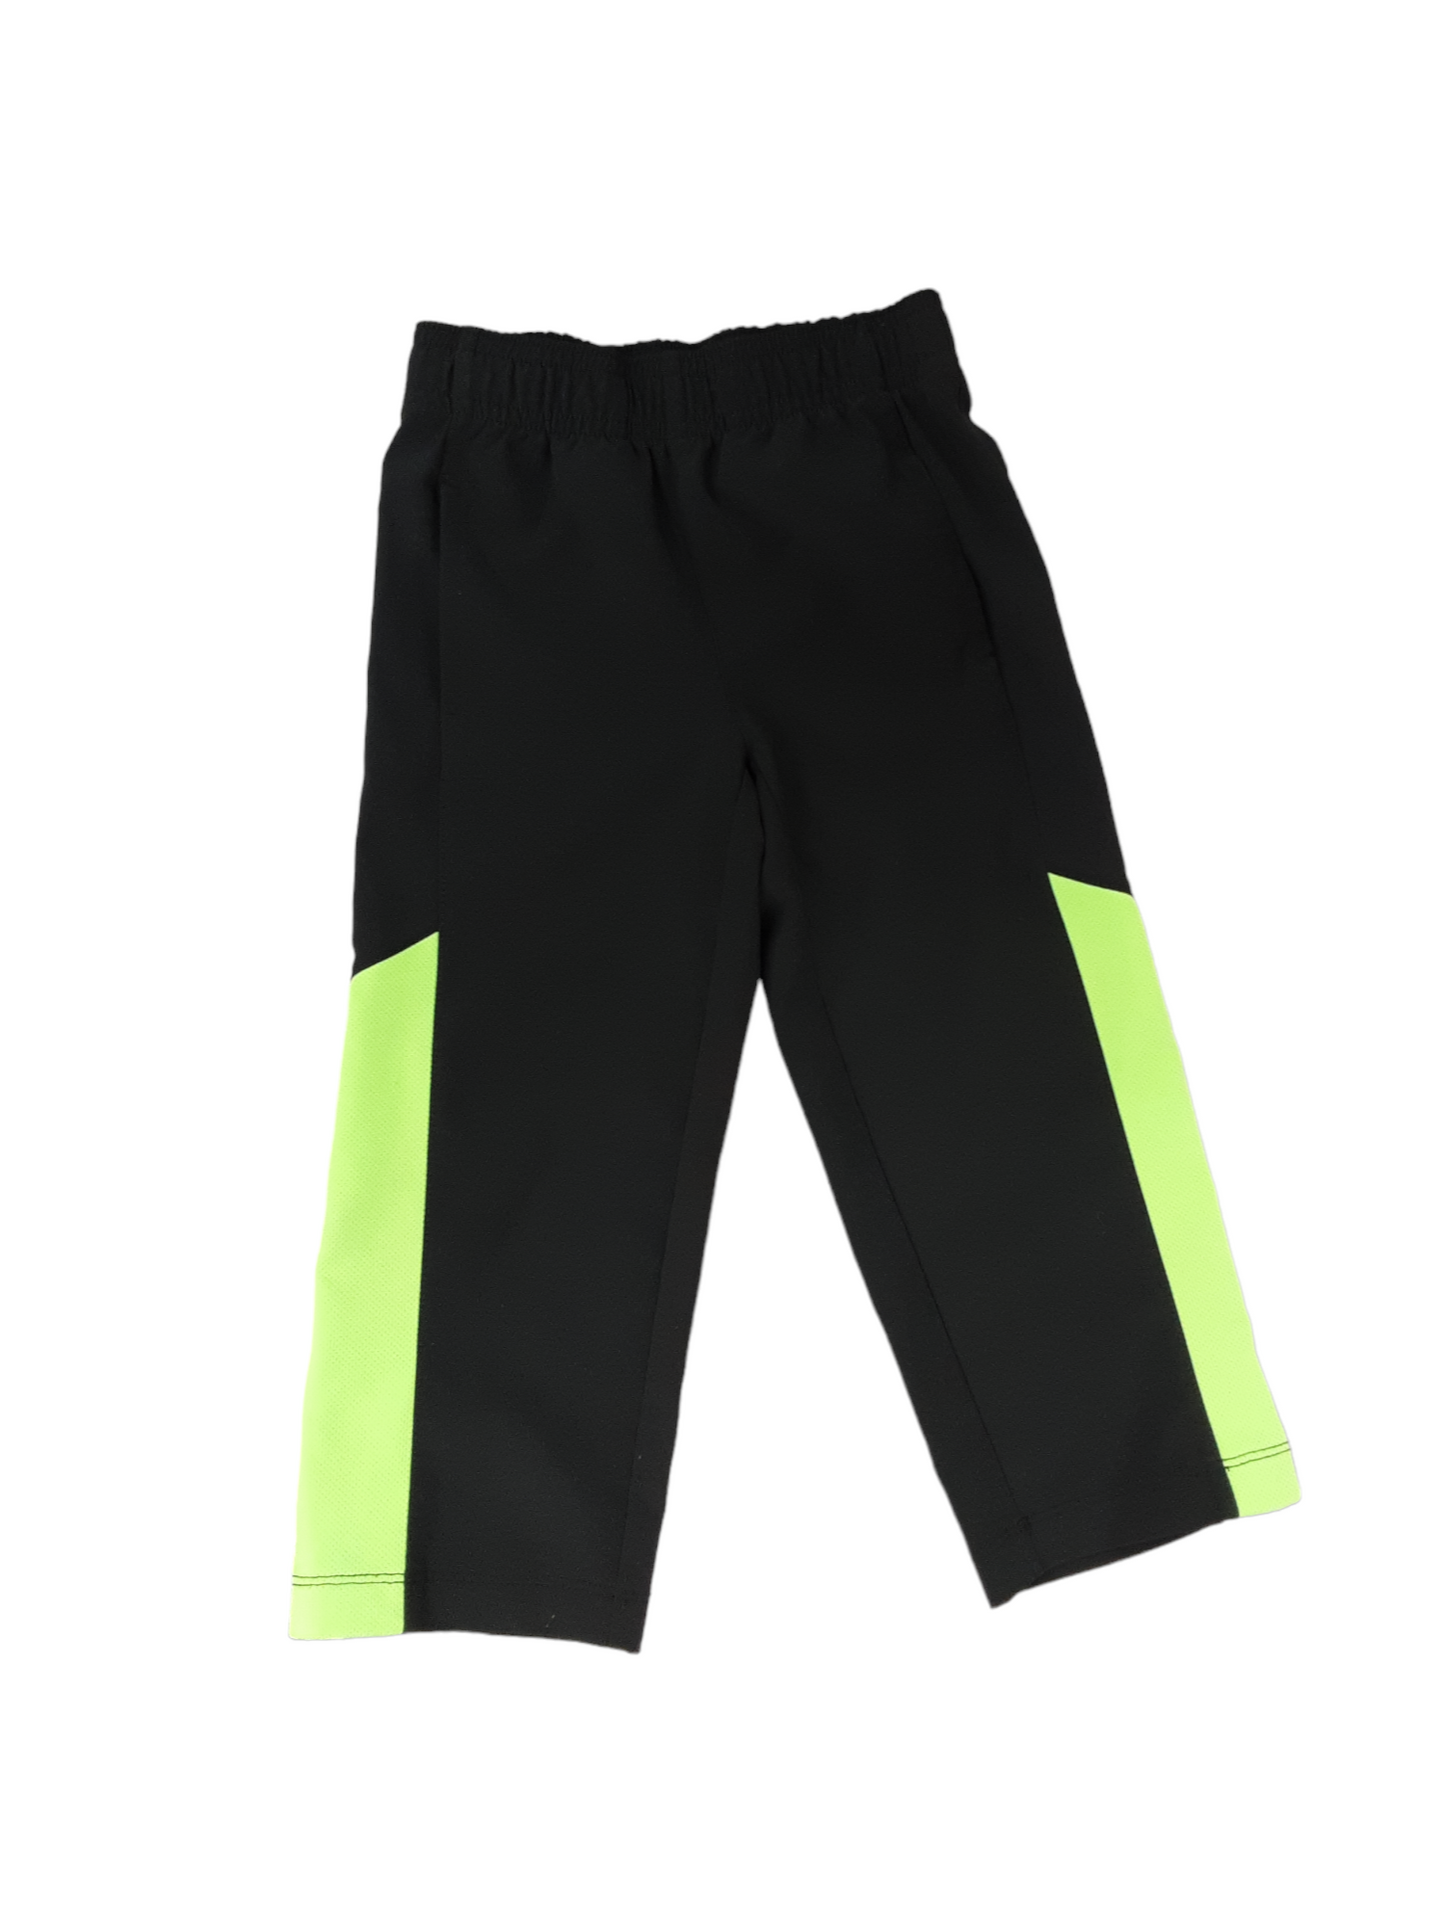 Thin athletic pants size 2t